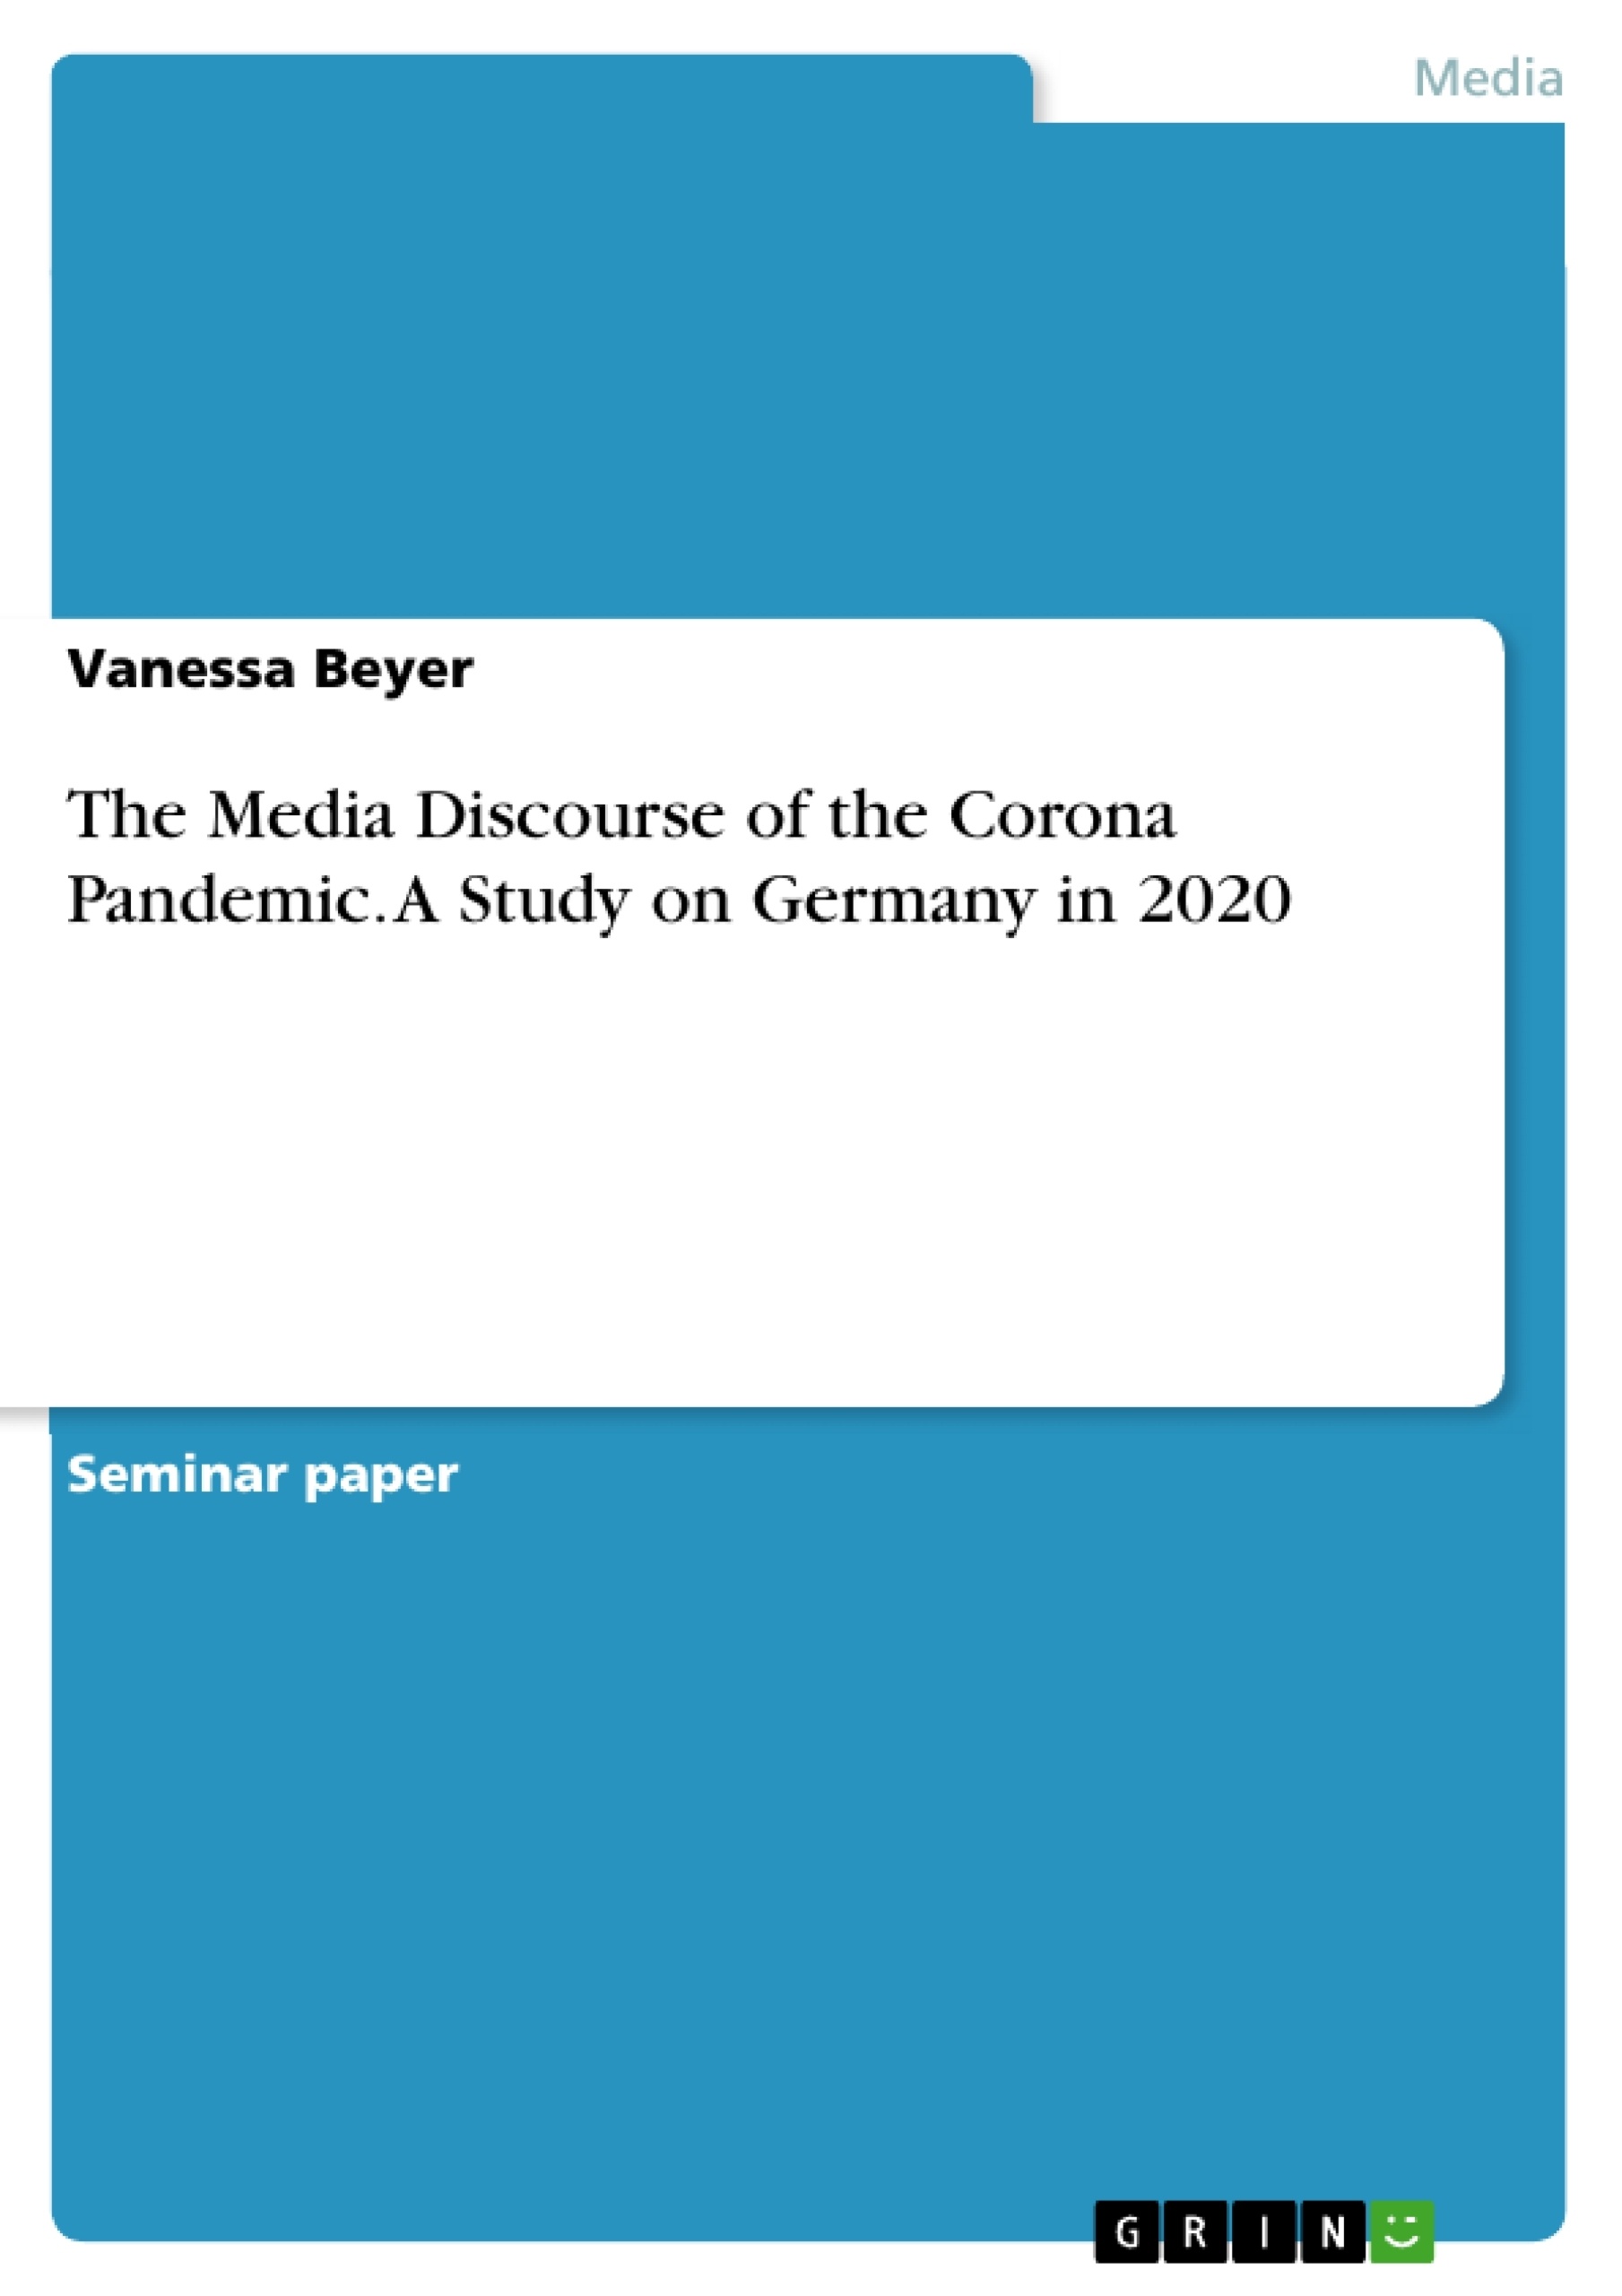 Title: The Media Discourse of the Corona Pandemic. A Study on Germany in 2020